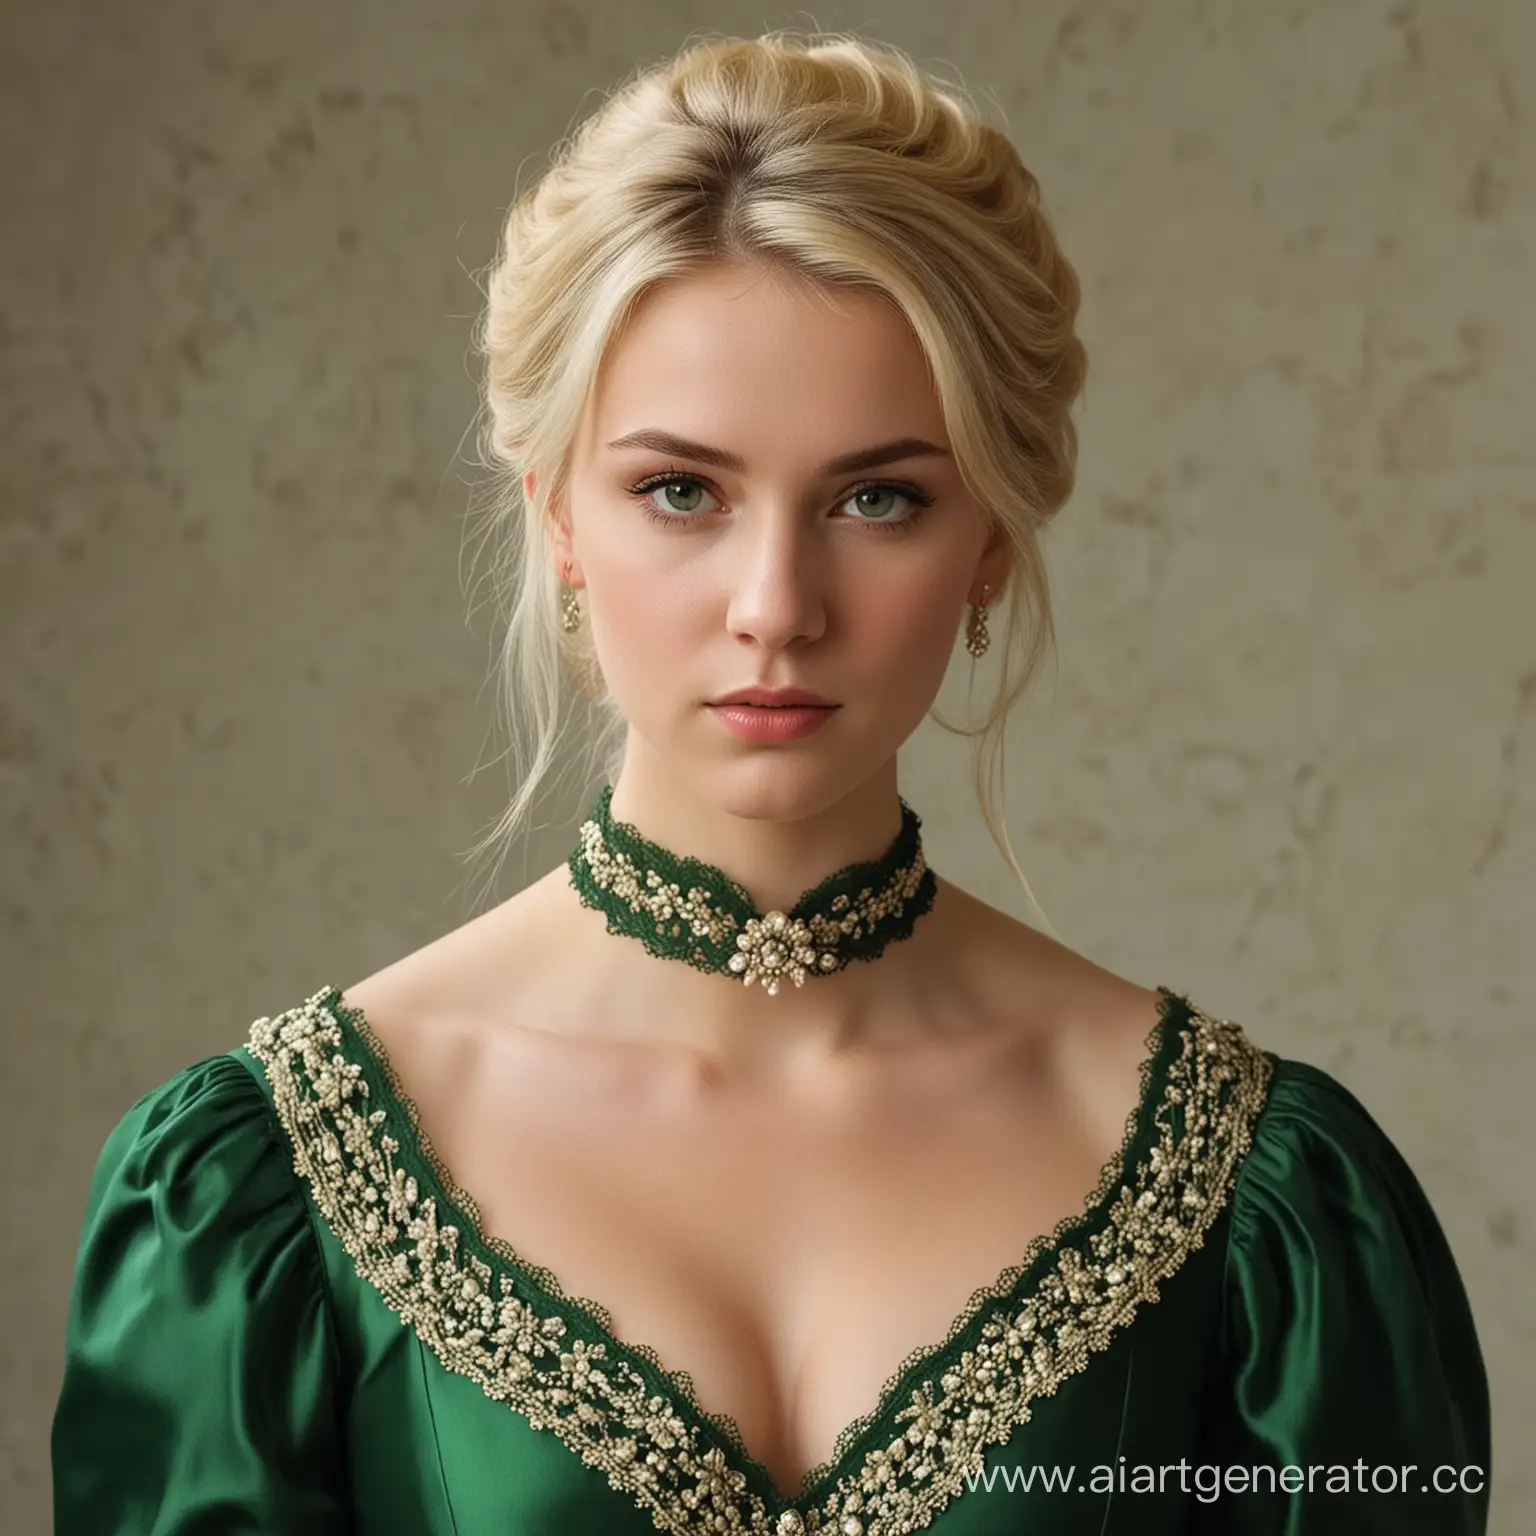 Blonde-Aristocrat-Girl-in-a-Striking-Green-Dress-with-Strict-Facial-Features